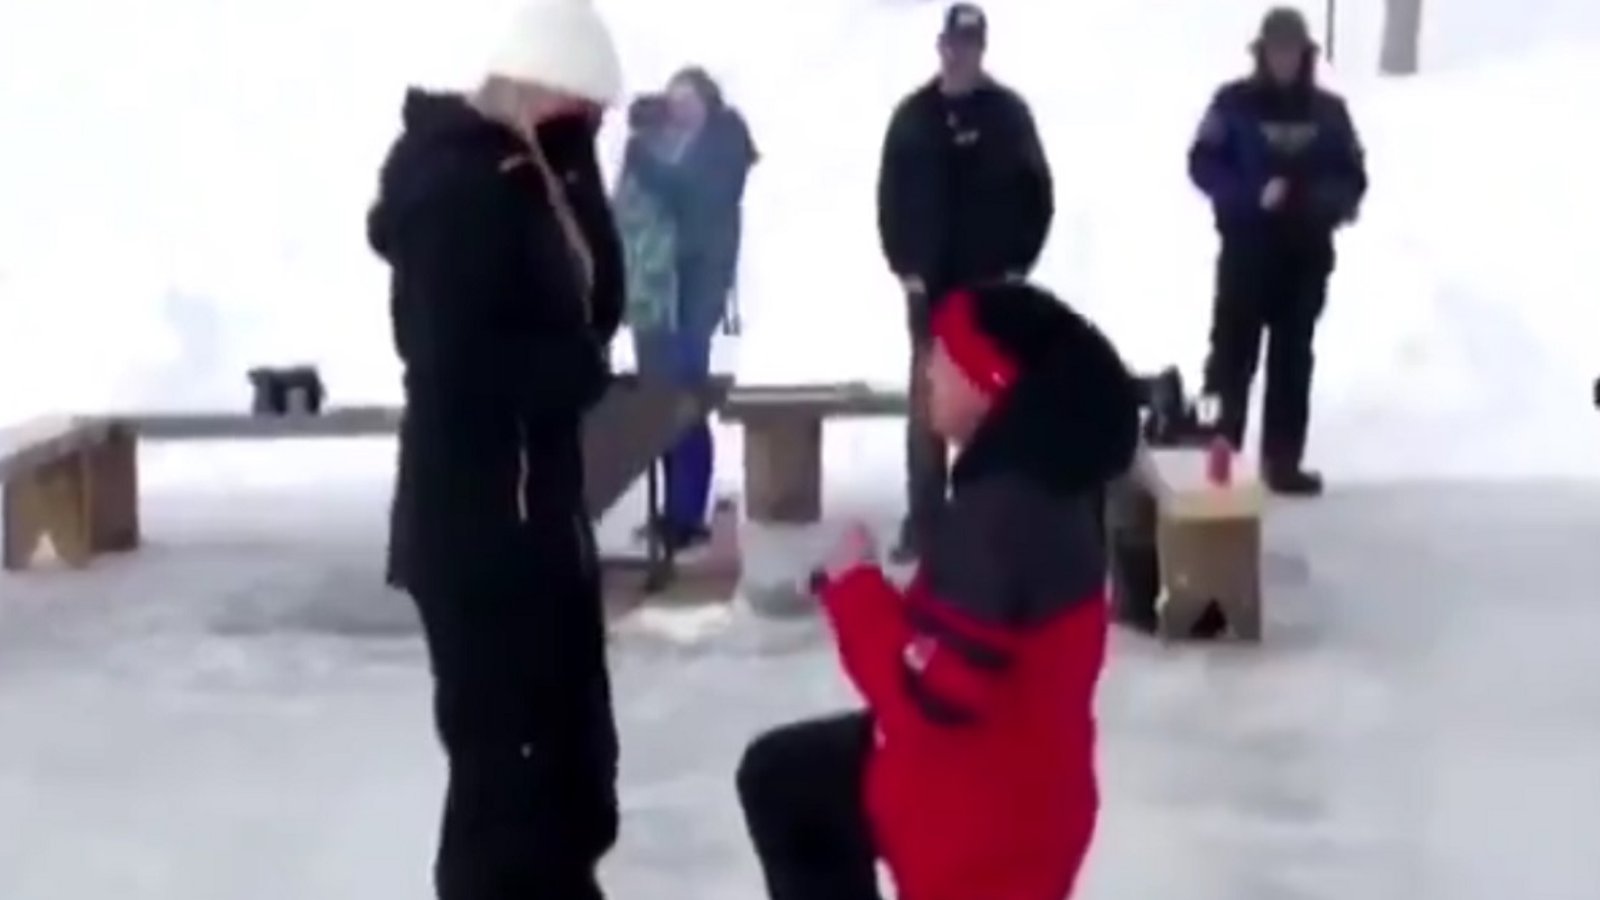 Young man proposes on outdoor rink in most Canadian proposal ever!